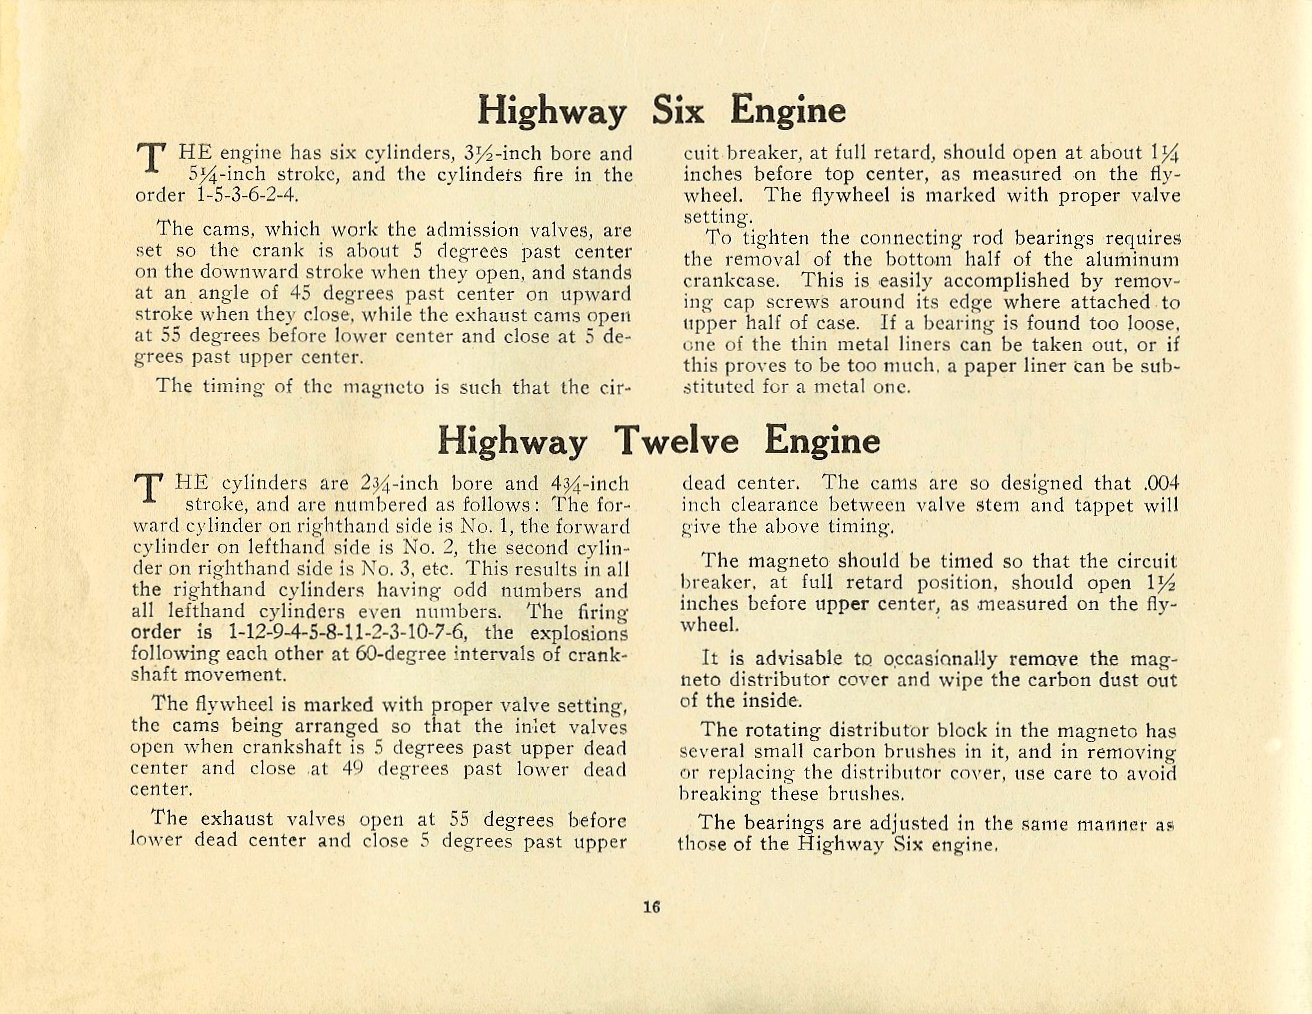 1915_National_Owners_Owners_Manual-16